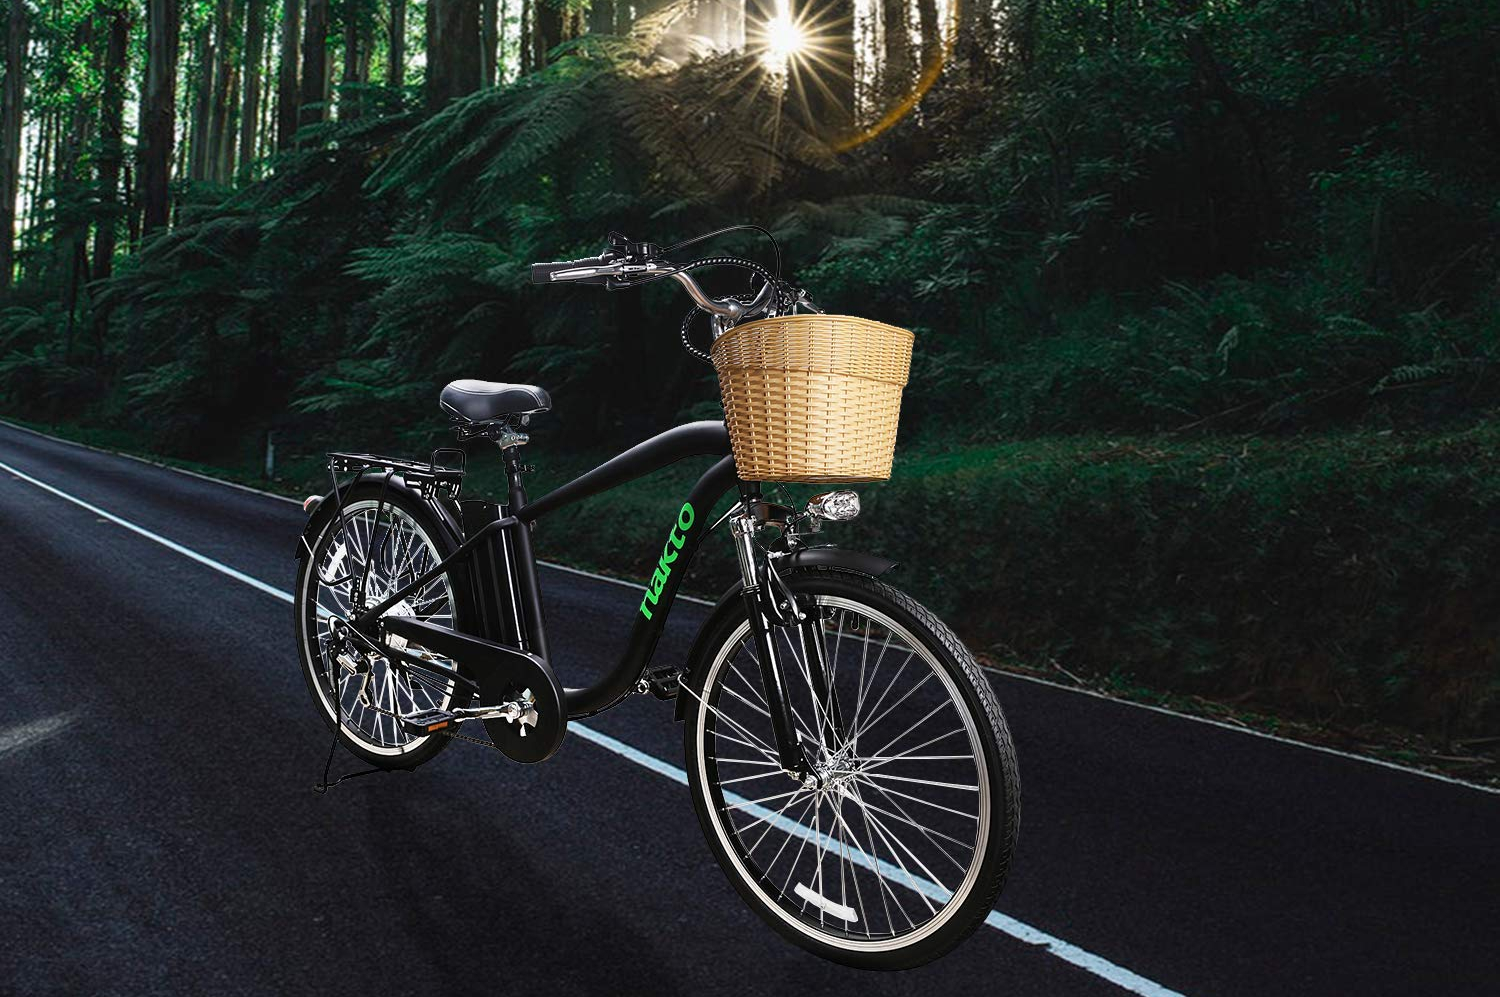 rei amazon and walmart drop prices for <entity>electric bikes</entity> labor day nakto 26 inch adult bicycle 5  1